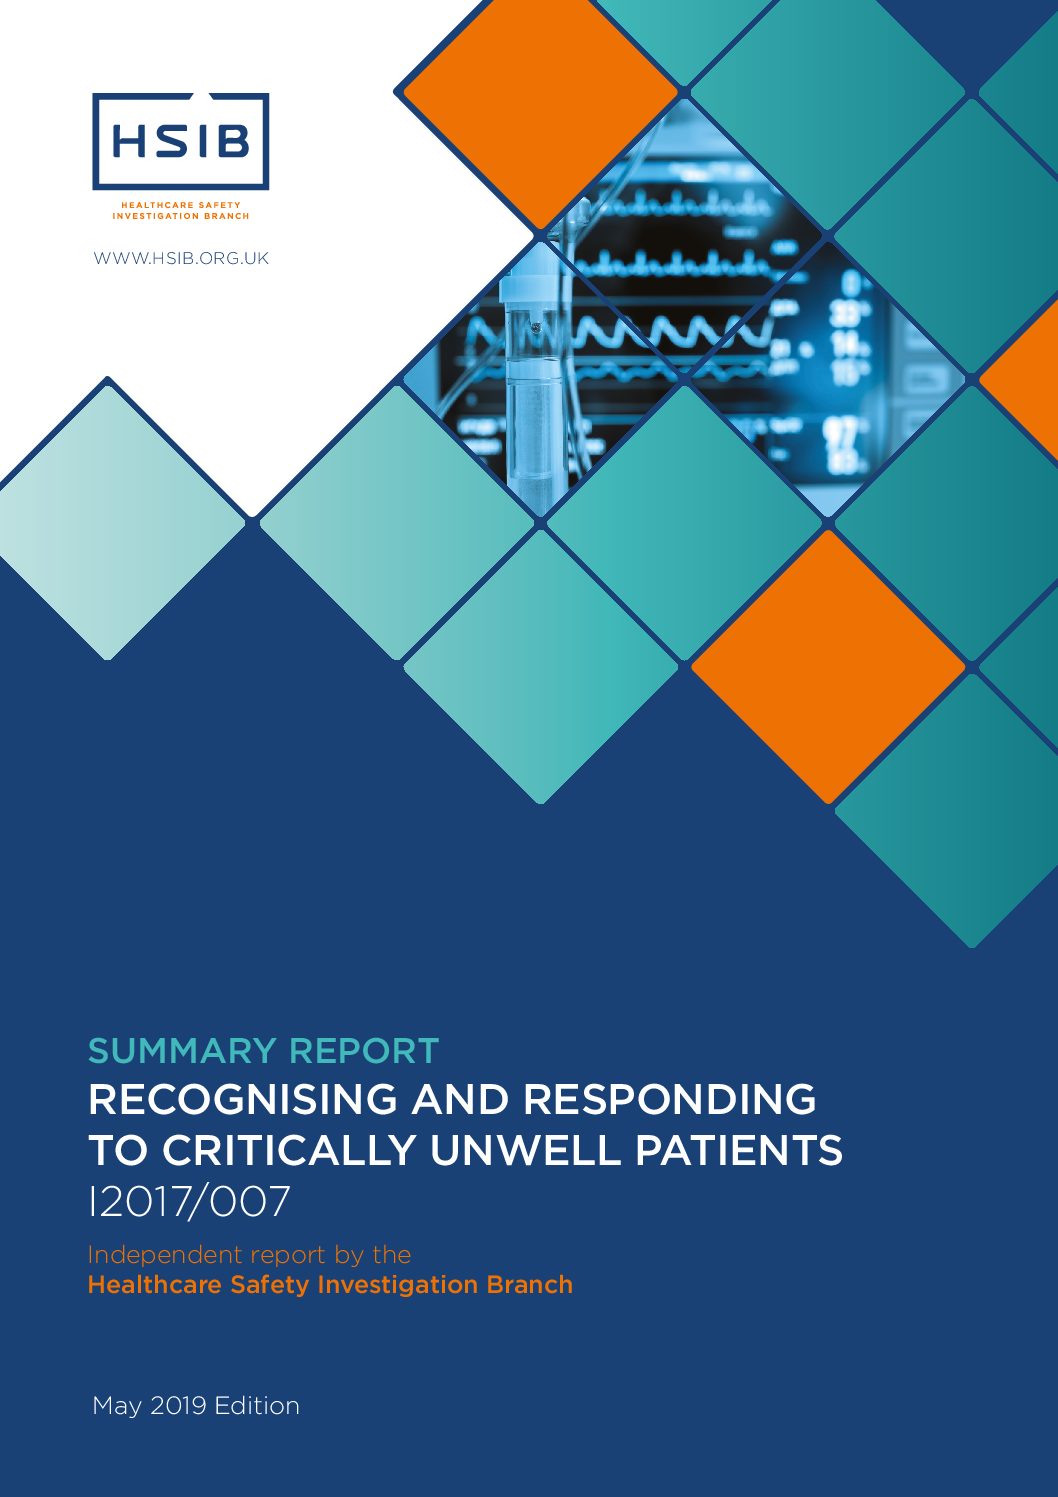 HSIB Summary Report, Recognising and responding to critically unwell patients